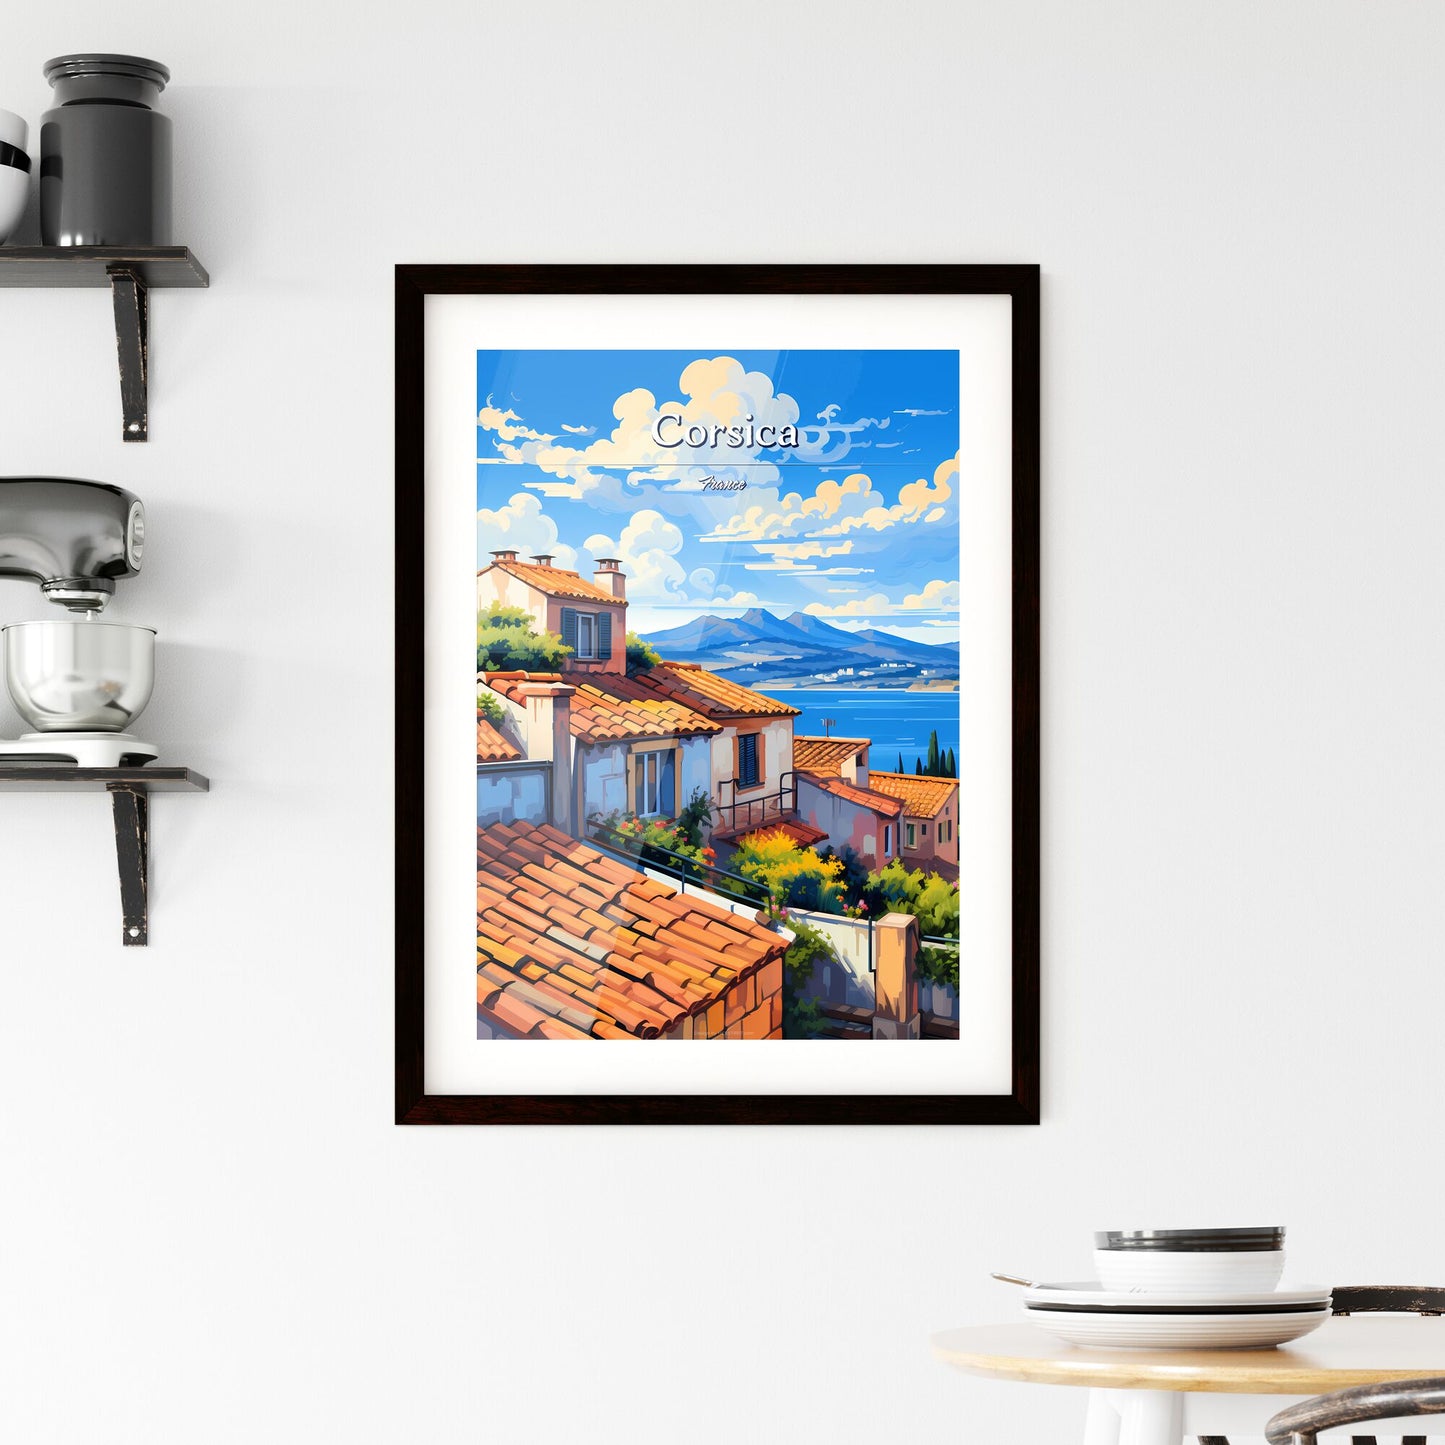 On the roofs of Corsica, France - Art print of a group of houses with trees and plants by a body of water Default Title